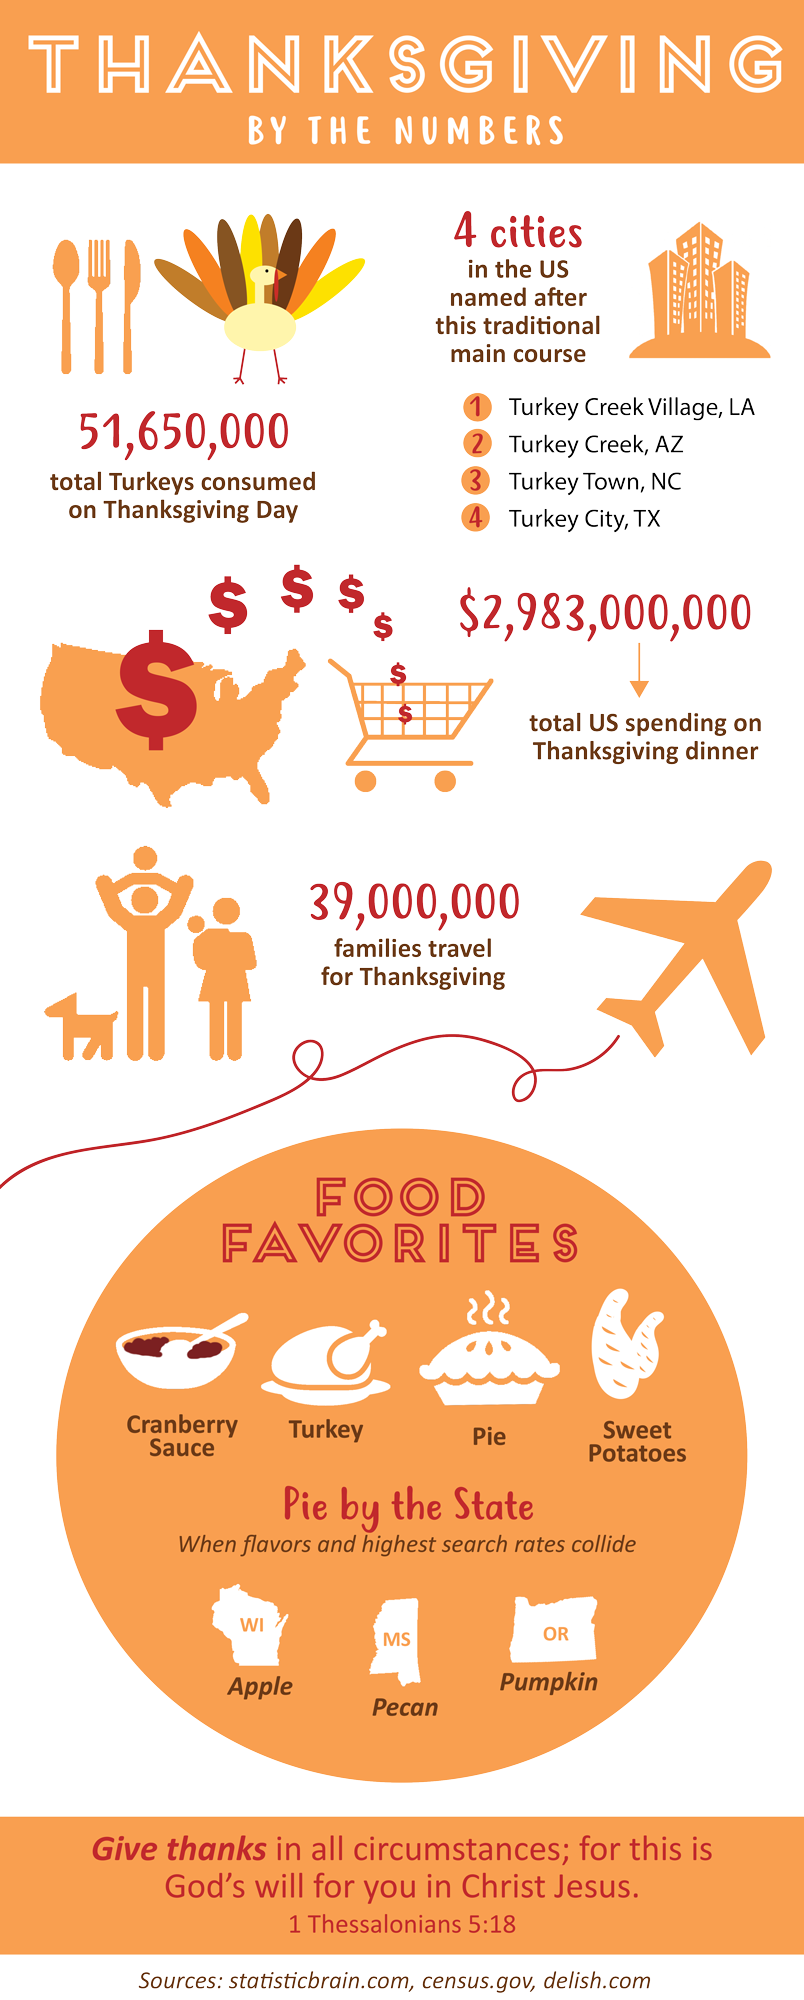 30 Infographics to Help You Prepare for Thanksgiving Part 12